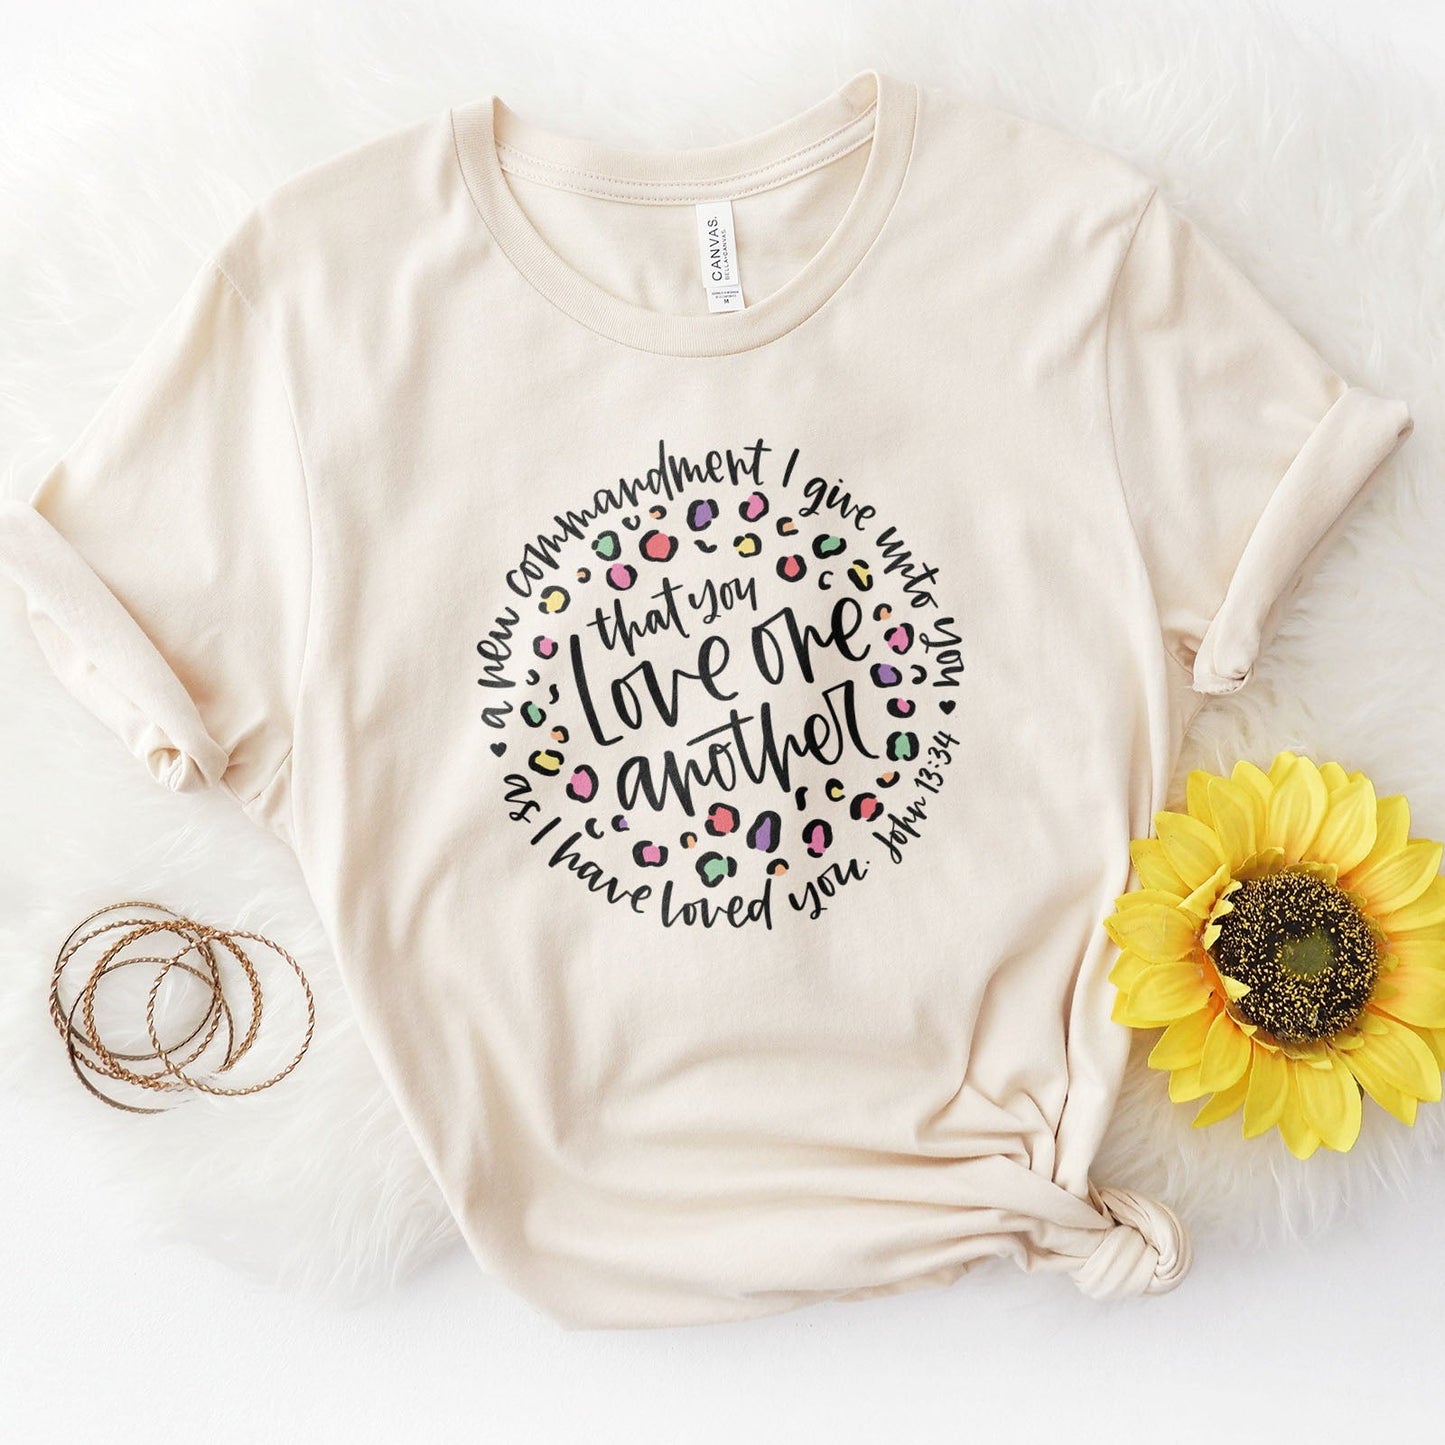 Leopard Love One Another John 13:34 Tee Shirts For Women - Christian Shirts for Women - Religious Tee Shirts